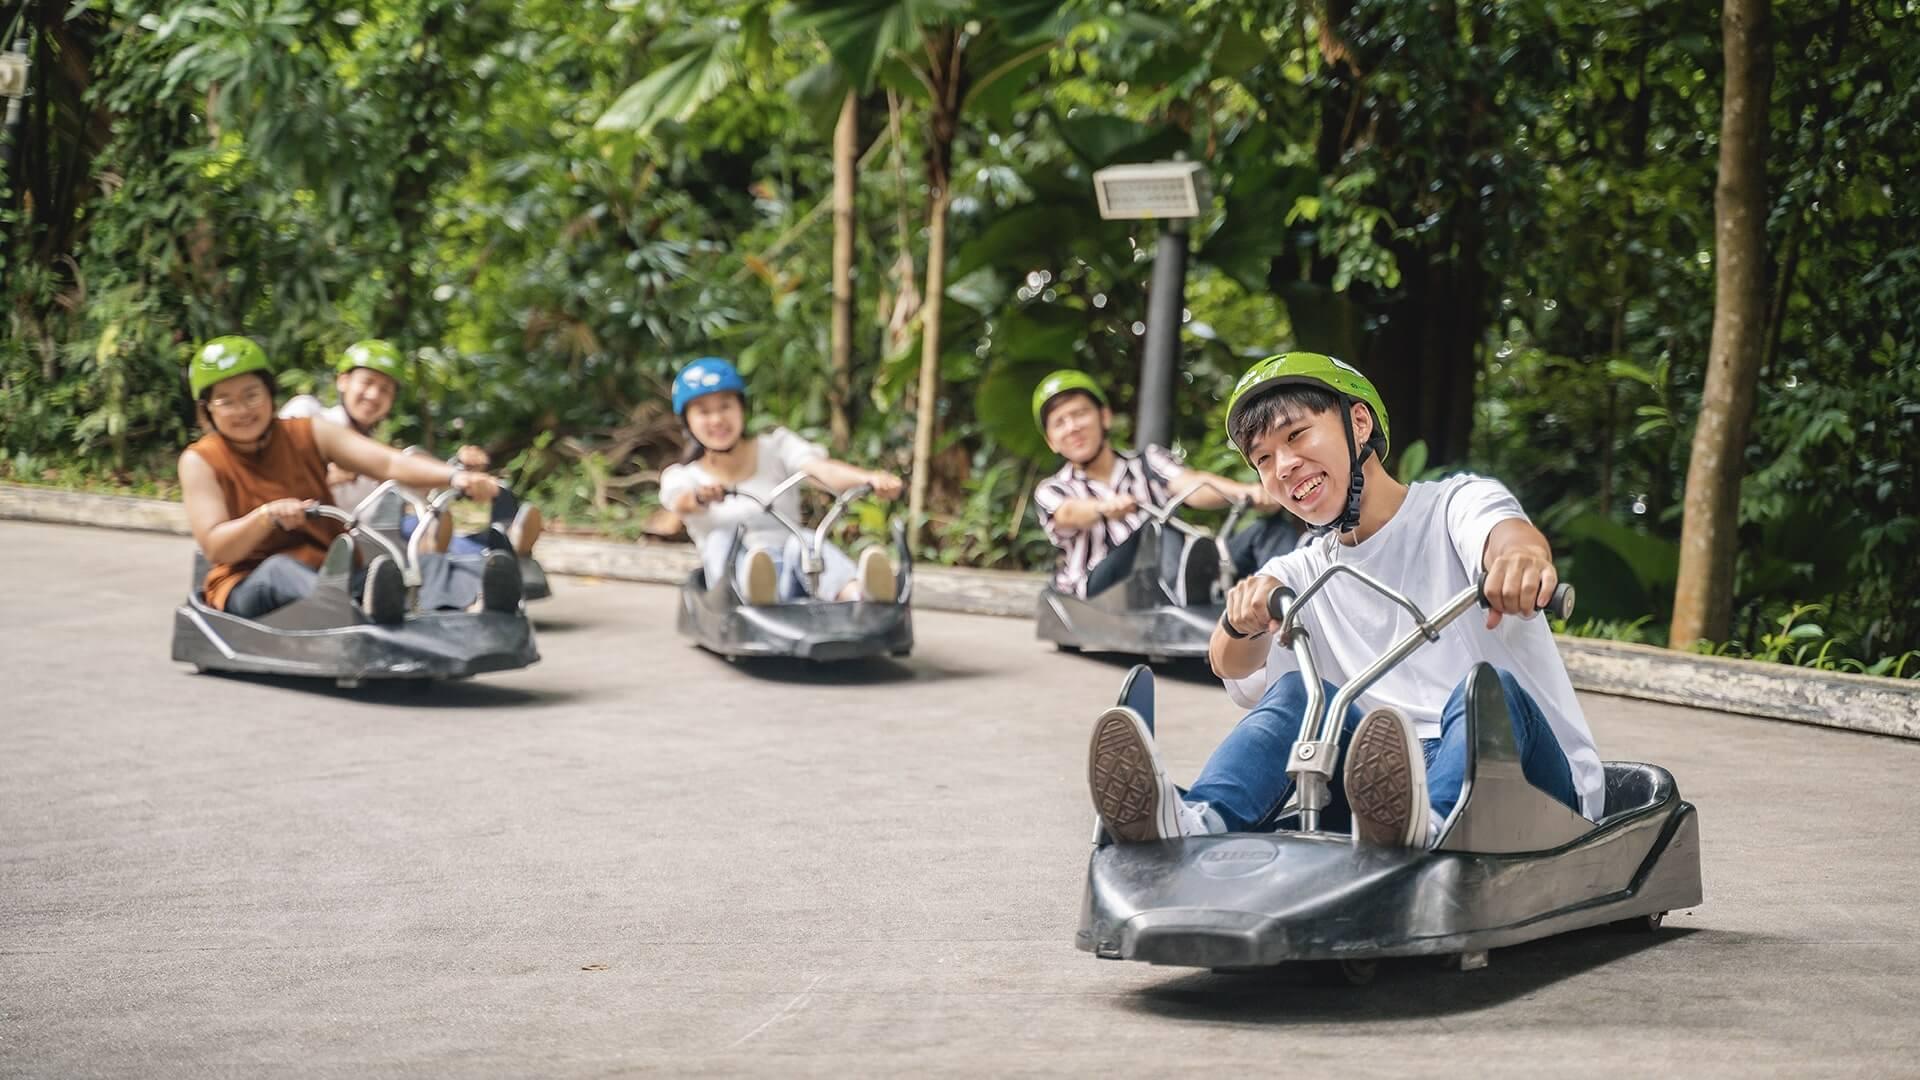 A man leads his friends down the Luge tracks at Skyline Luge Singapore.